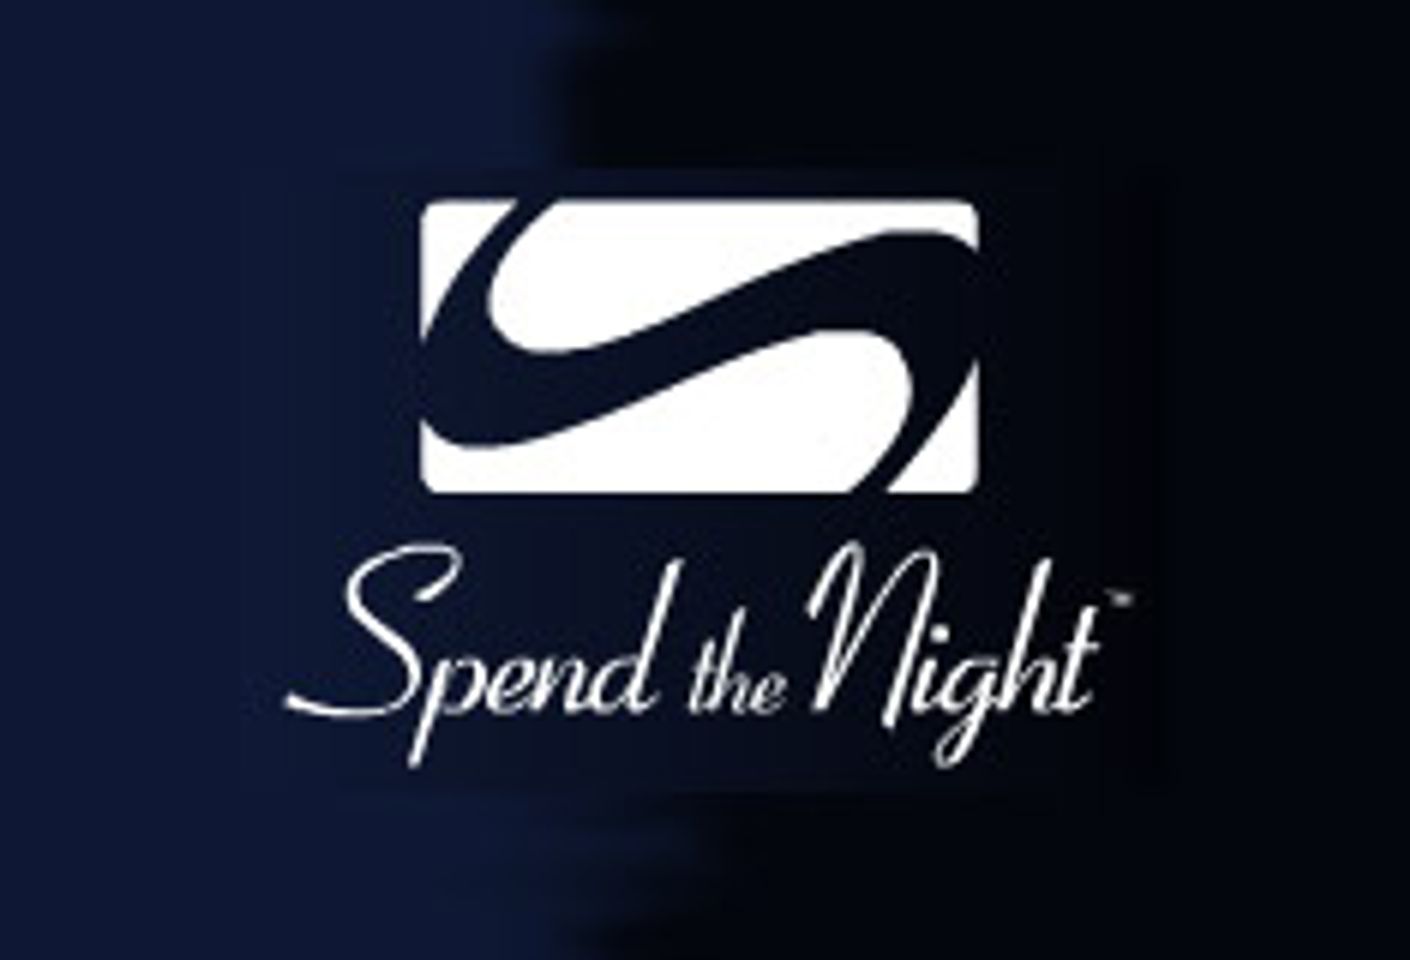 TLA Partners With Republik Games to Promote Spend the Night